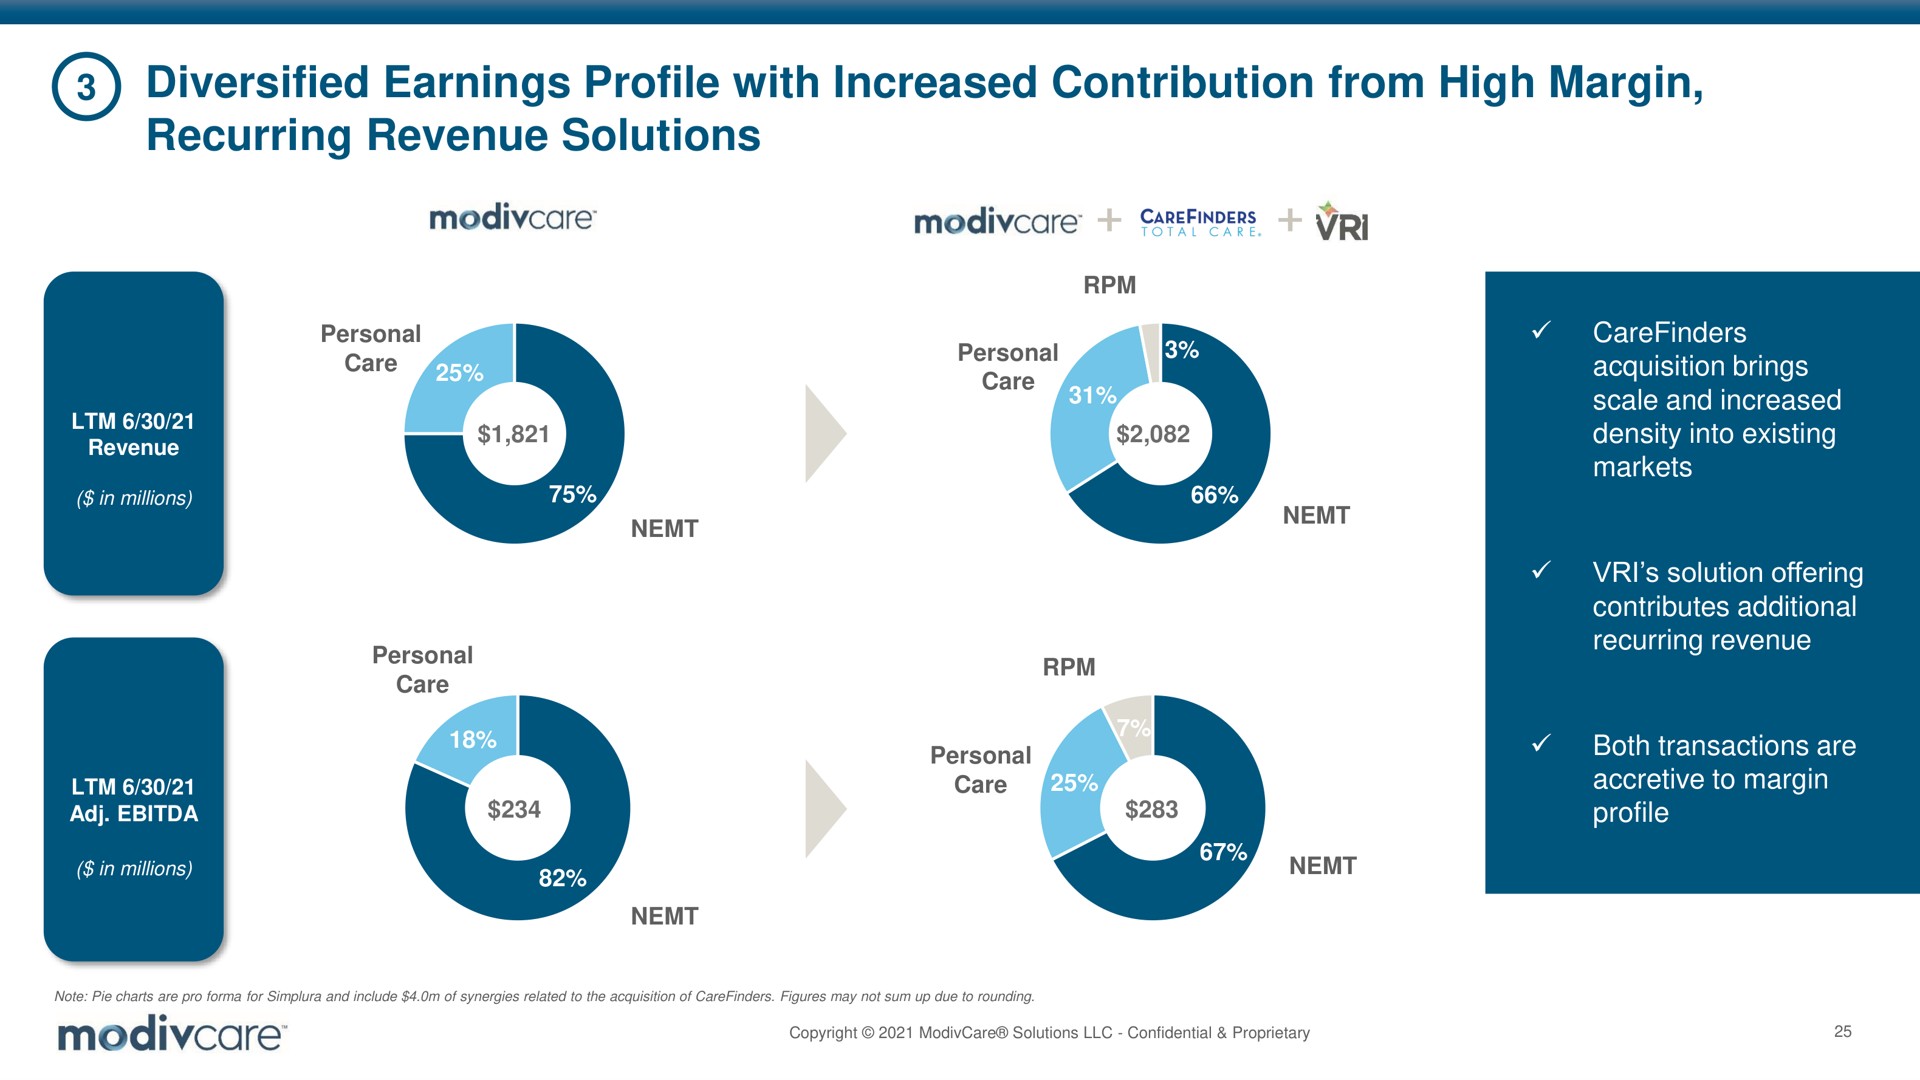 diversified earnings profile with increased contribution from high margin recurring revenue solutions | ModivCare